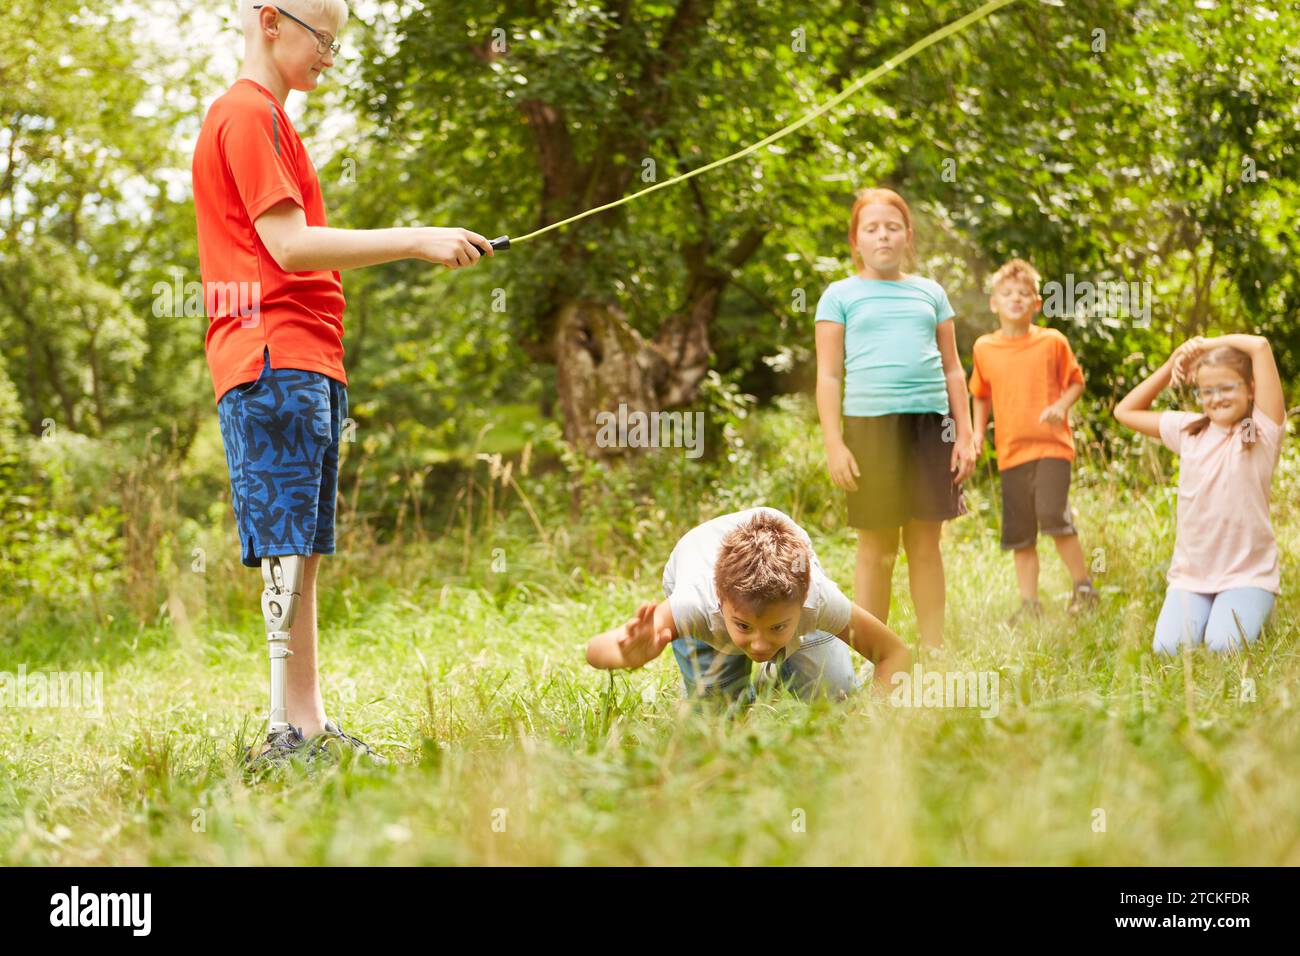 Boy crawling under skipping rope while playing with friends on grass at park Stock Photo